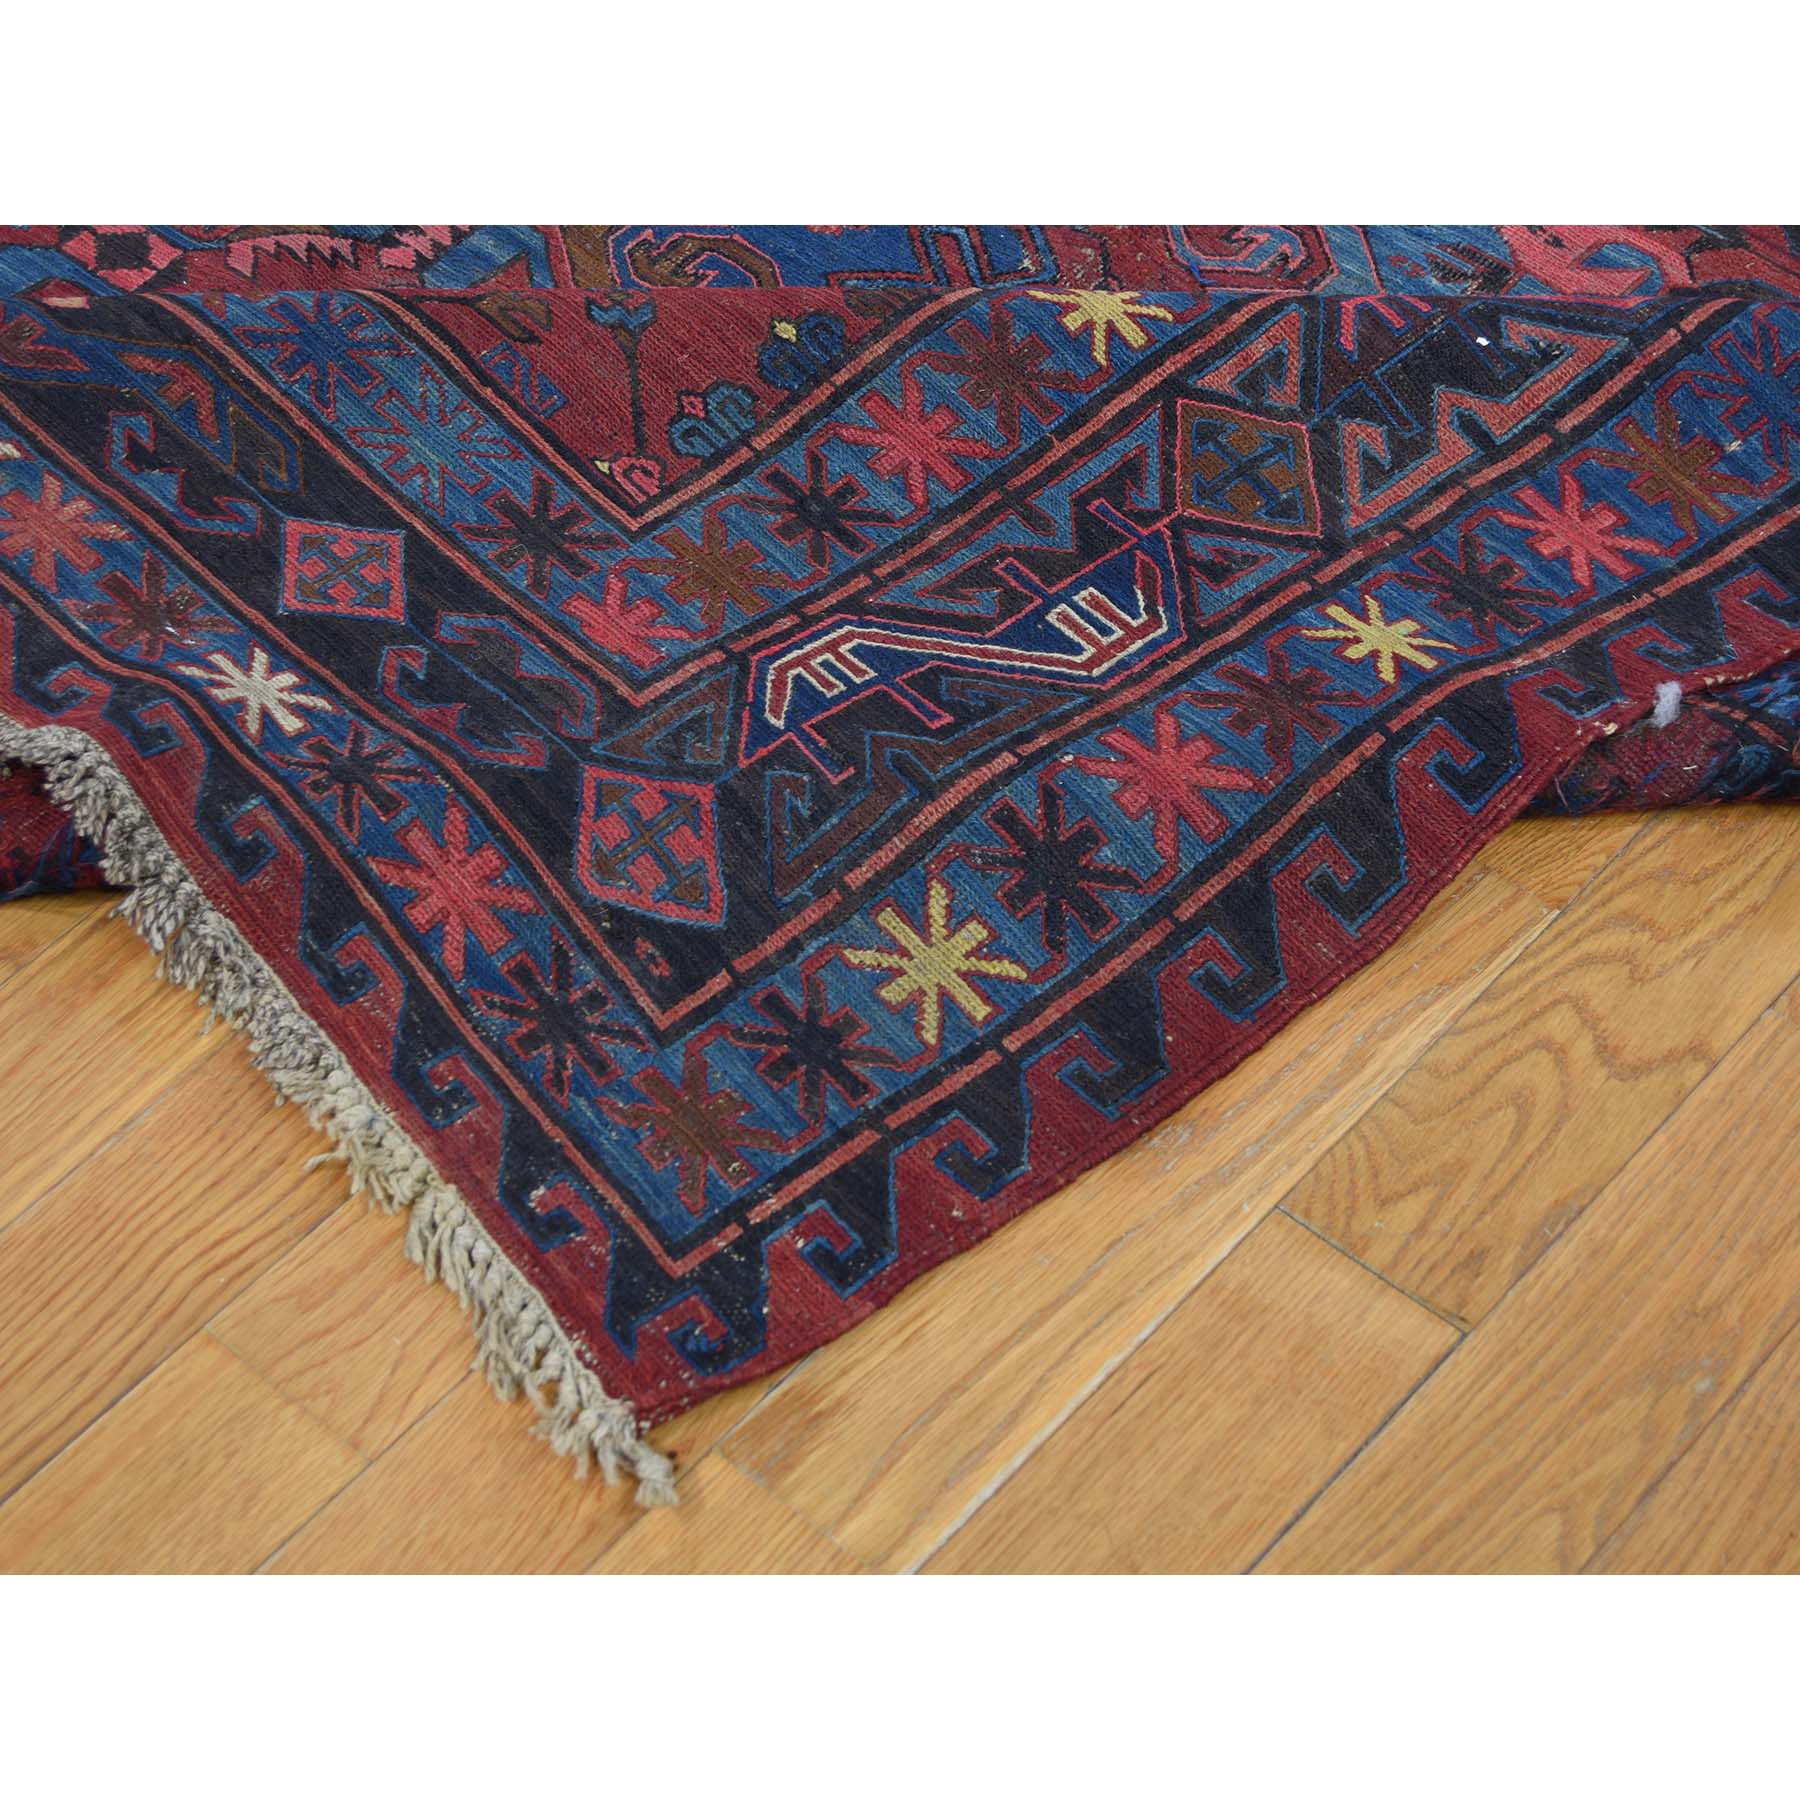 10-1 x13-7  Antique Caucasian Soumak Good Condition Pure Wool Hand-Knotted Oriental Rug 